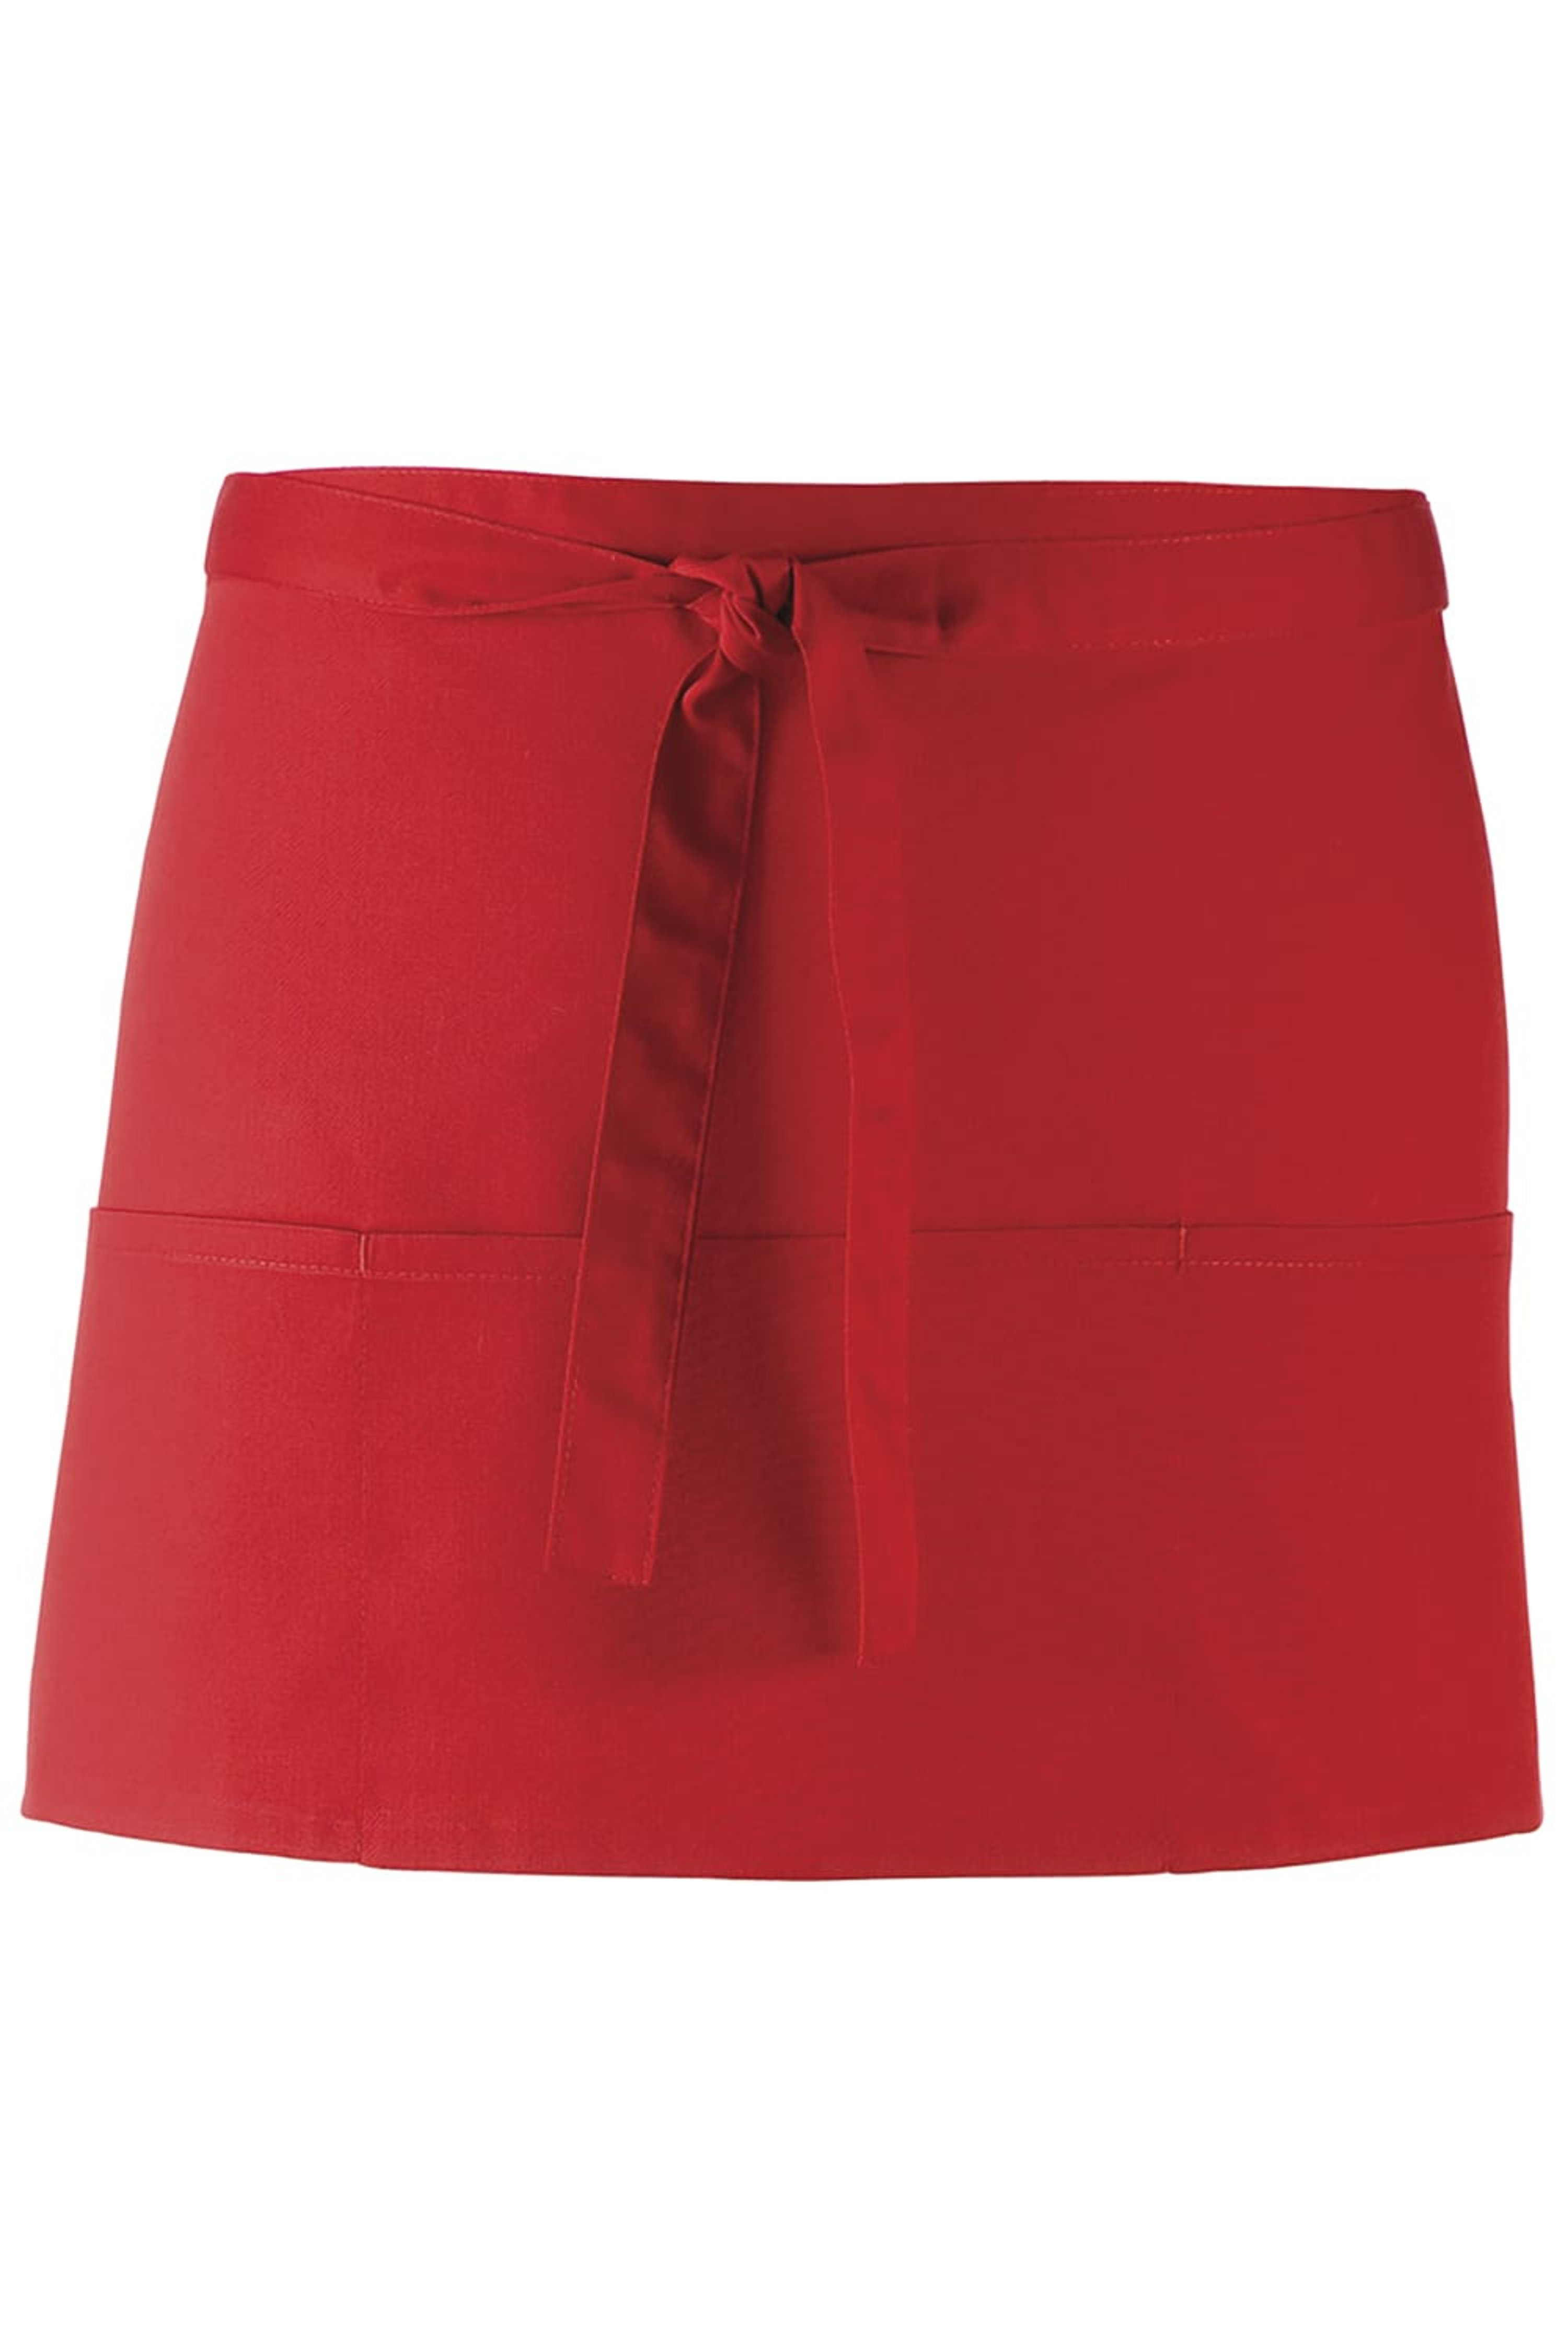 PREMIER PREMIER LADIES/WOMENS COLORS 3 POCKET APRON / WORKWEAR (PACK OF 2) (RED) (ONE SIZE)